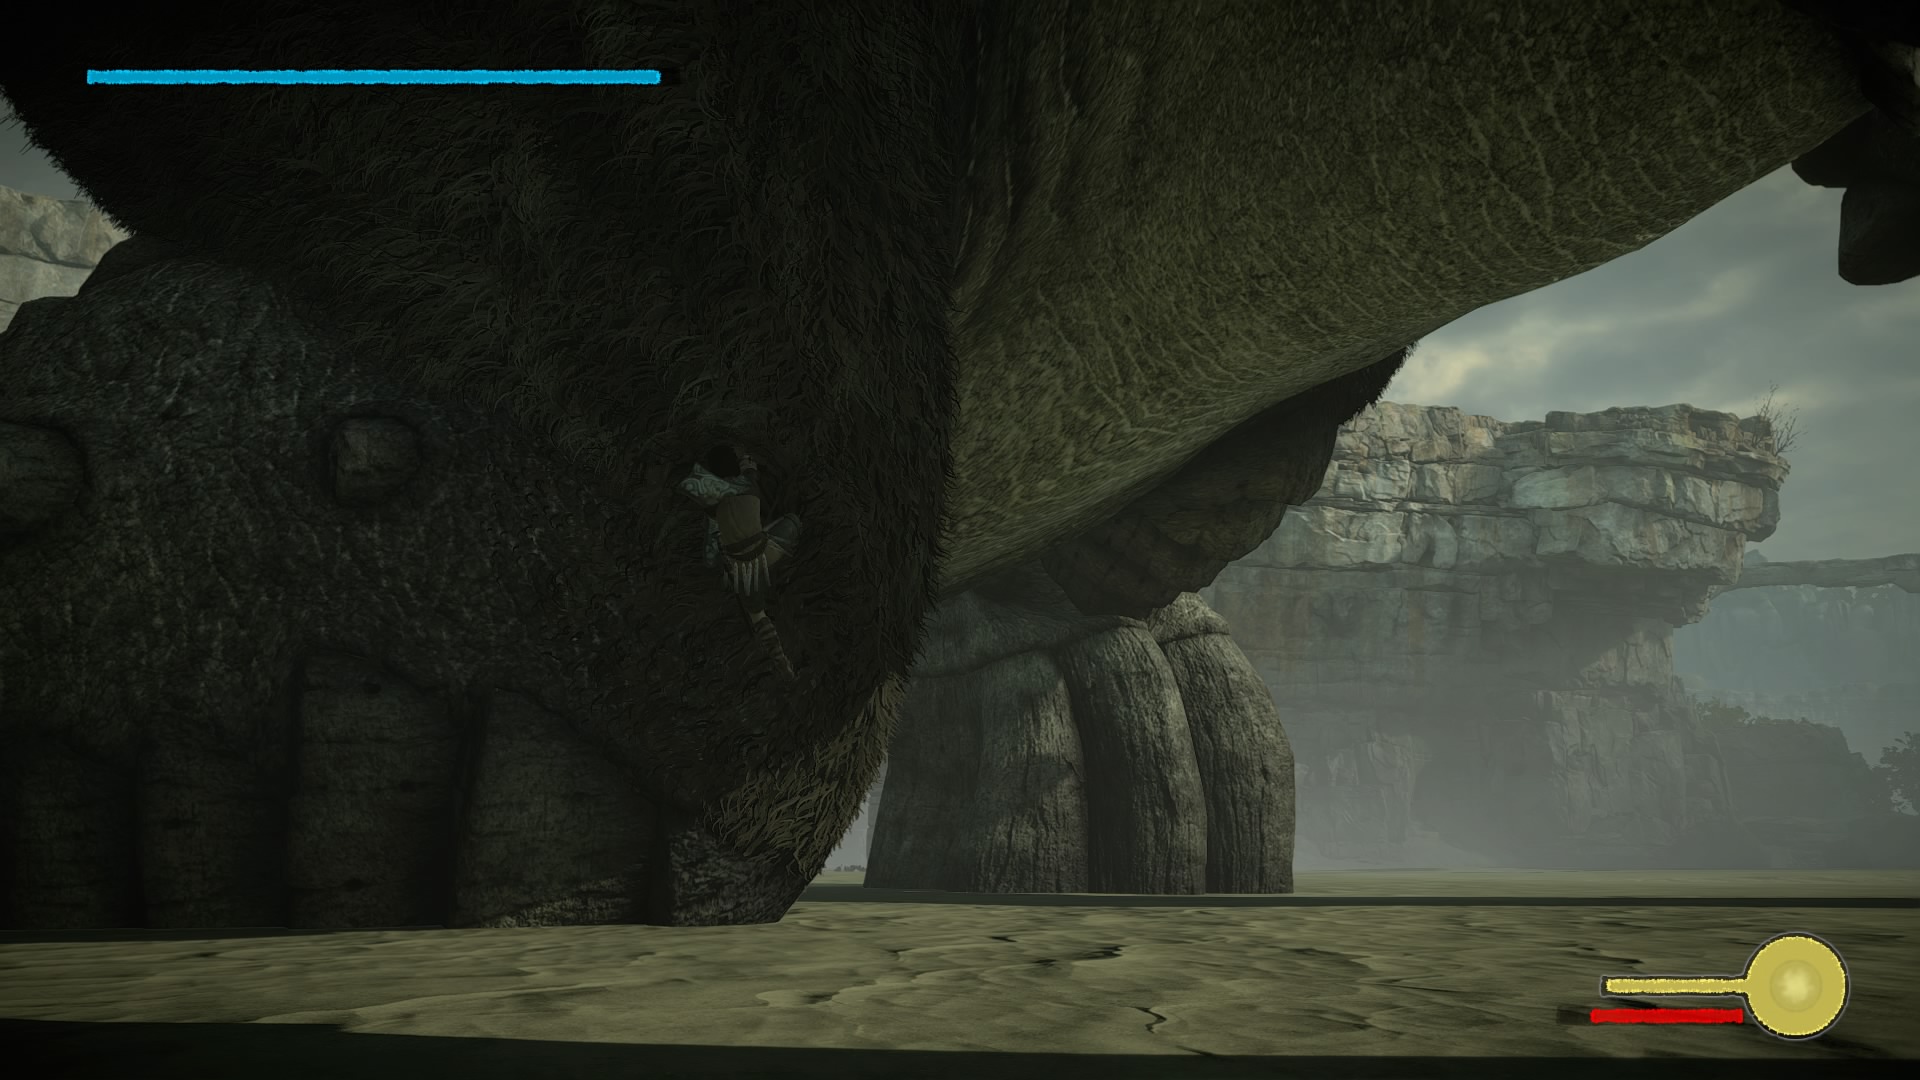 Shadow of the Colossus PS4 Boss Guide - How to Find and Kill All